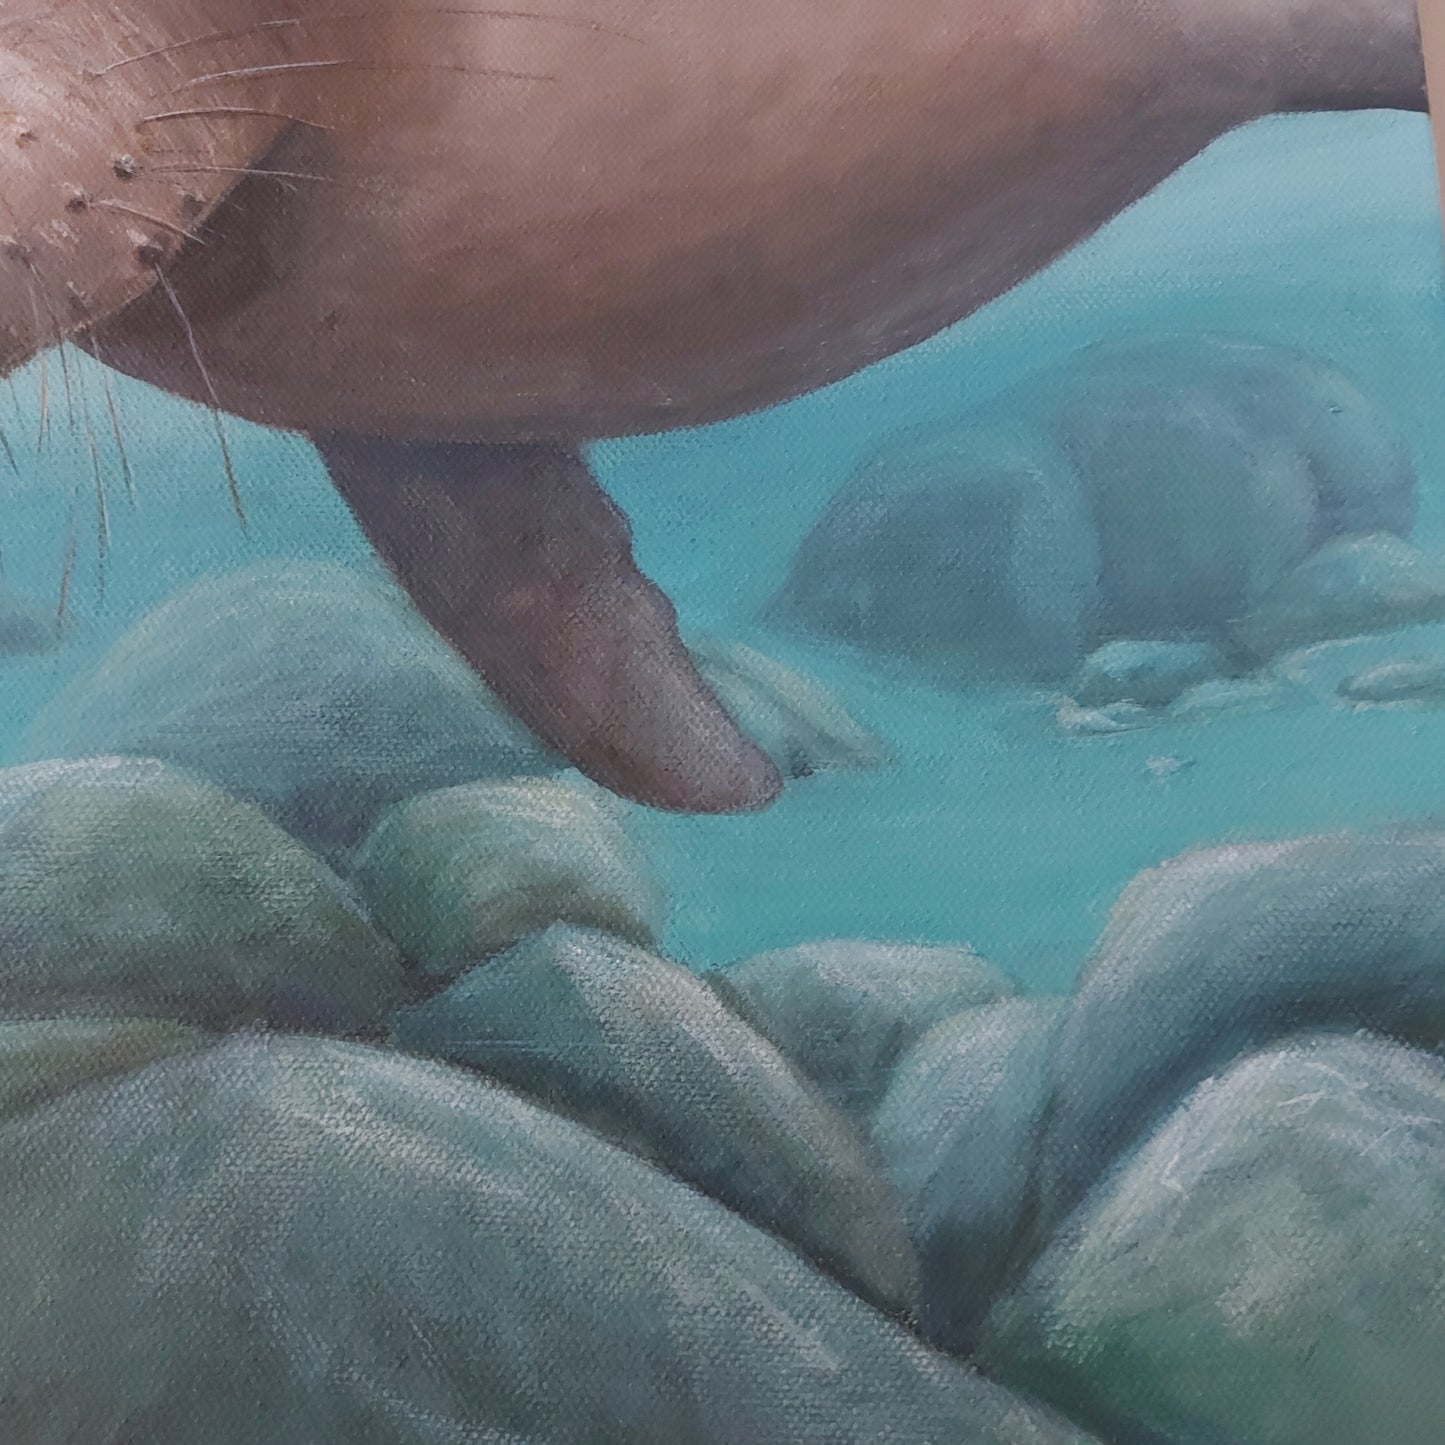 Curious is an acrylic painting by Katherine Polack of a sea lion underwater facing the viewer as it swims in light blue water with large rocks underneath it. When curiosity and cuteness meet! BC photographer Shelton Dupreez captured this intriguing moment in the Galapagos on one of his expeditions supporting wildlife conservation. 18 x 24" acrylic on canvas-Katherine Polack